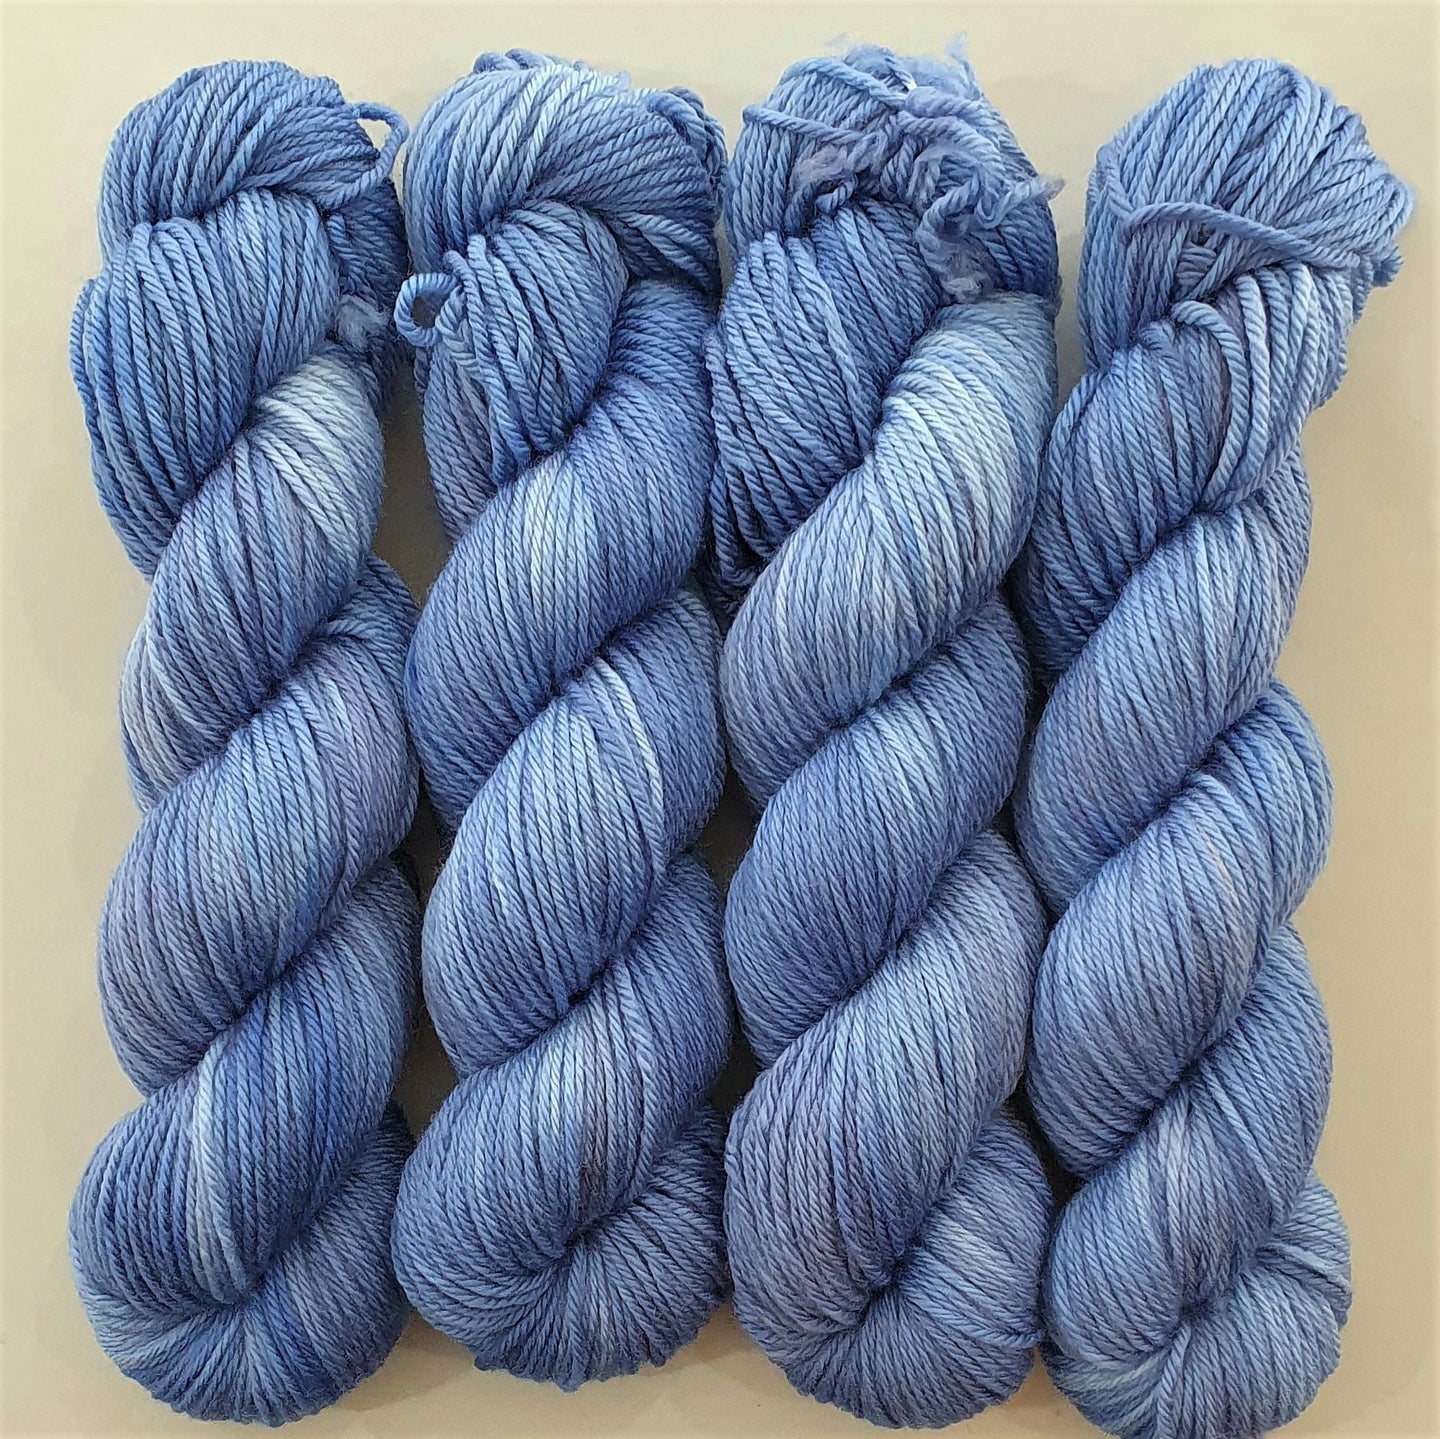 Soulful (Baa-Ram-Ewe 8ply DK) (Dyed as Ordered if Not in Stock)